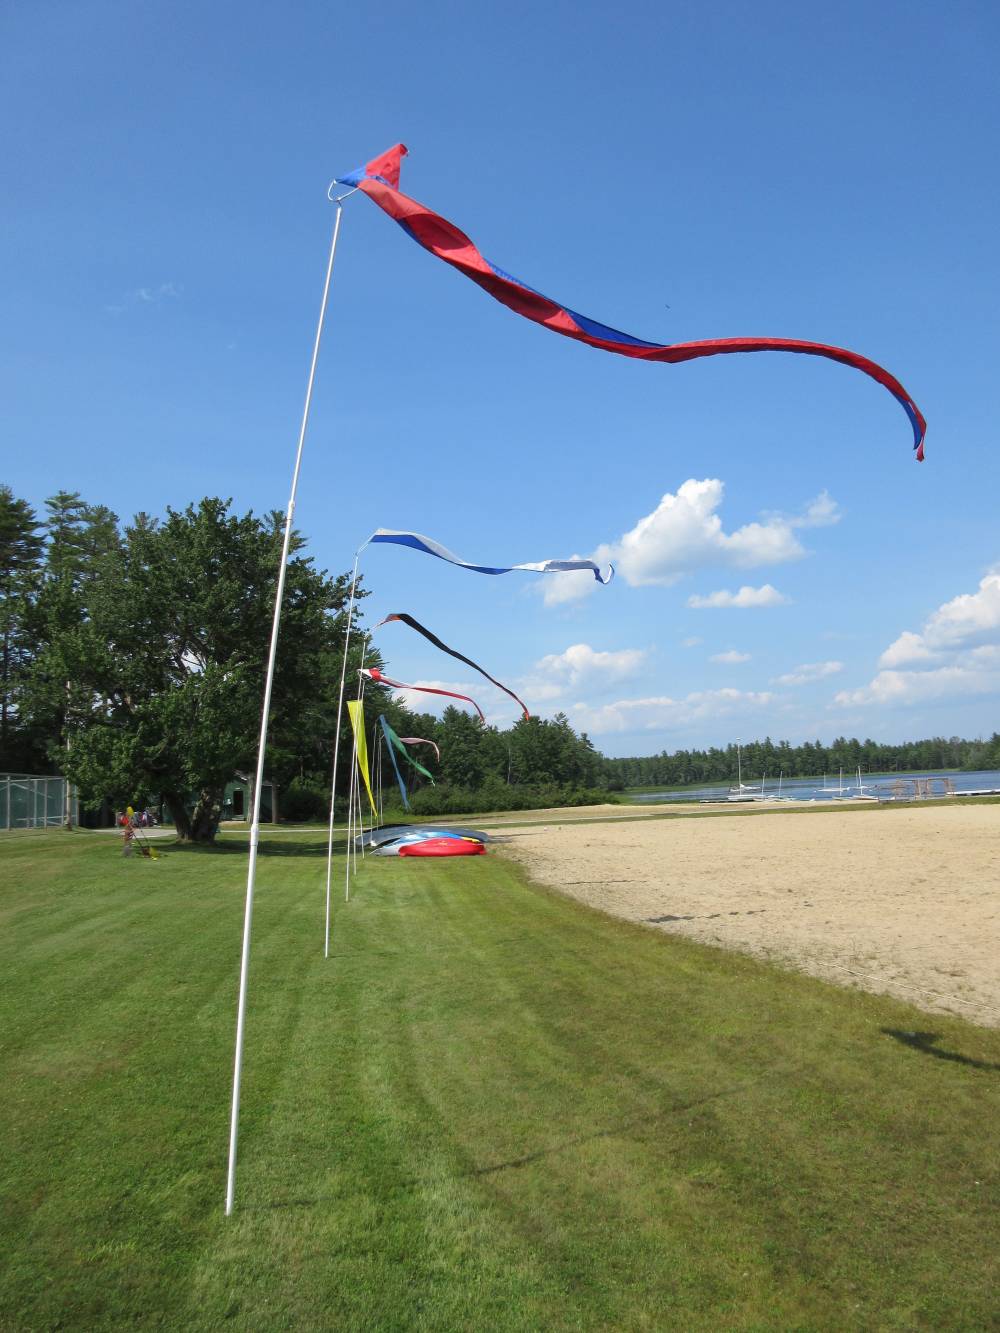 TOP MAINE CHEER CAMP: Tripp Lake Camp is a Top Cheer Summer Camp located in Poland Maine offering many fun and enriching Cheer and other camp programs. 